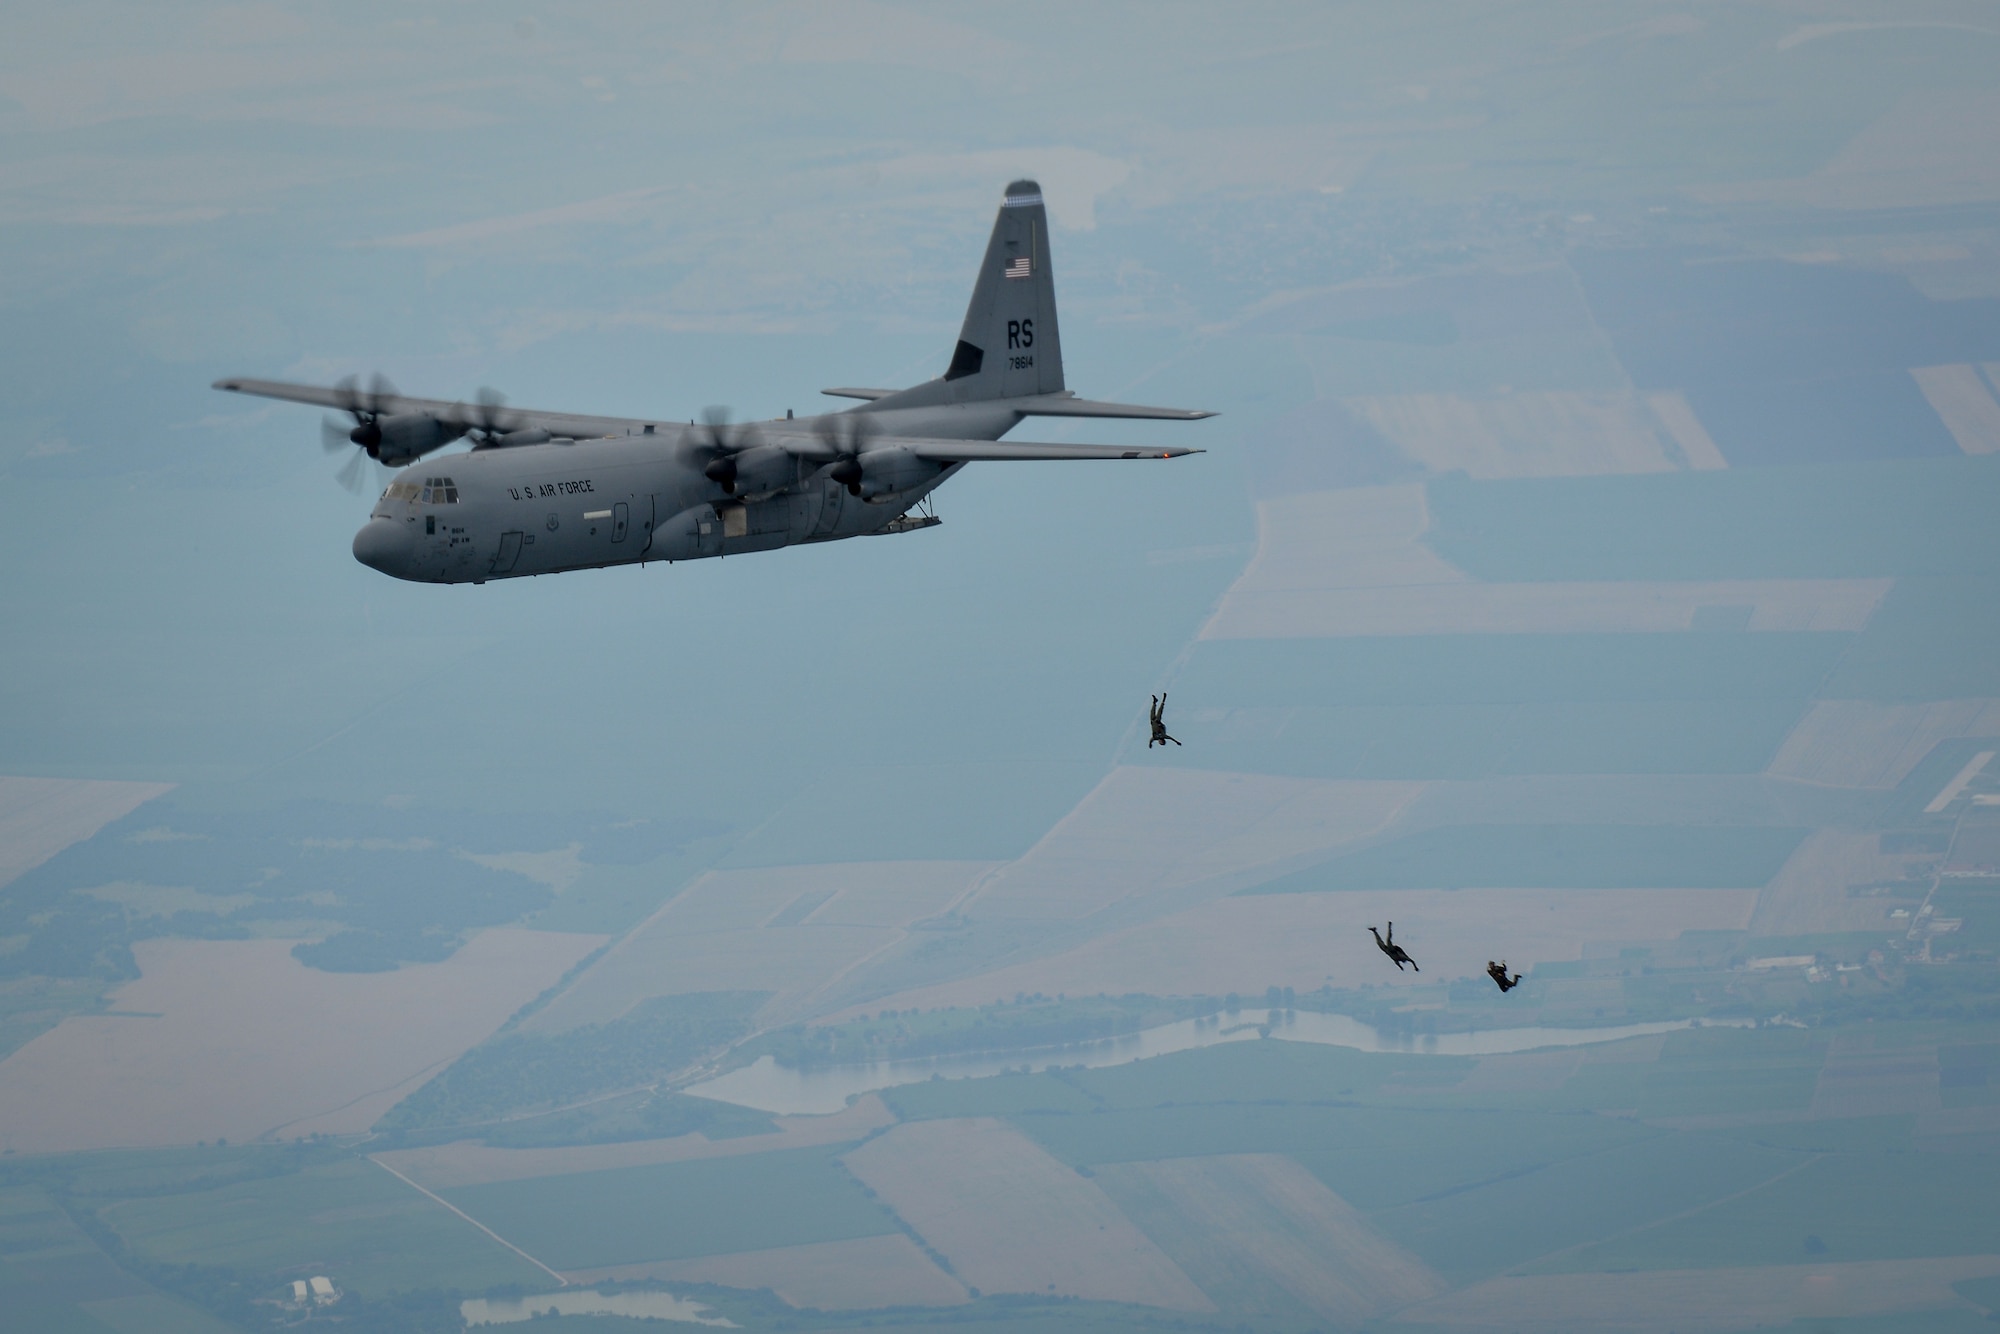 U.S. and Bulgarian paratroopers jump from a C-130J Super Hercules during a halo jump over Plovdiv, Bulgaria, July 14, 2015. During the three-hour formation flight, which consisted of two U.S. Air Force C-130Js and one Bulgarian air force C-27, more than 50 paratroopers exited the aircraft and landed near Plovdiv Airport. (U.S. Air Force photo/Senior Airman Nicole Sikorski)